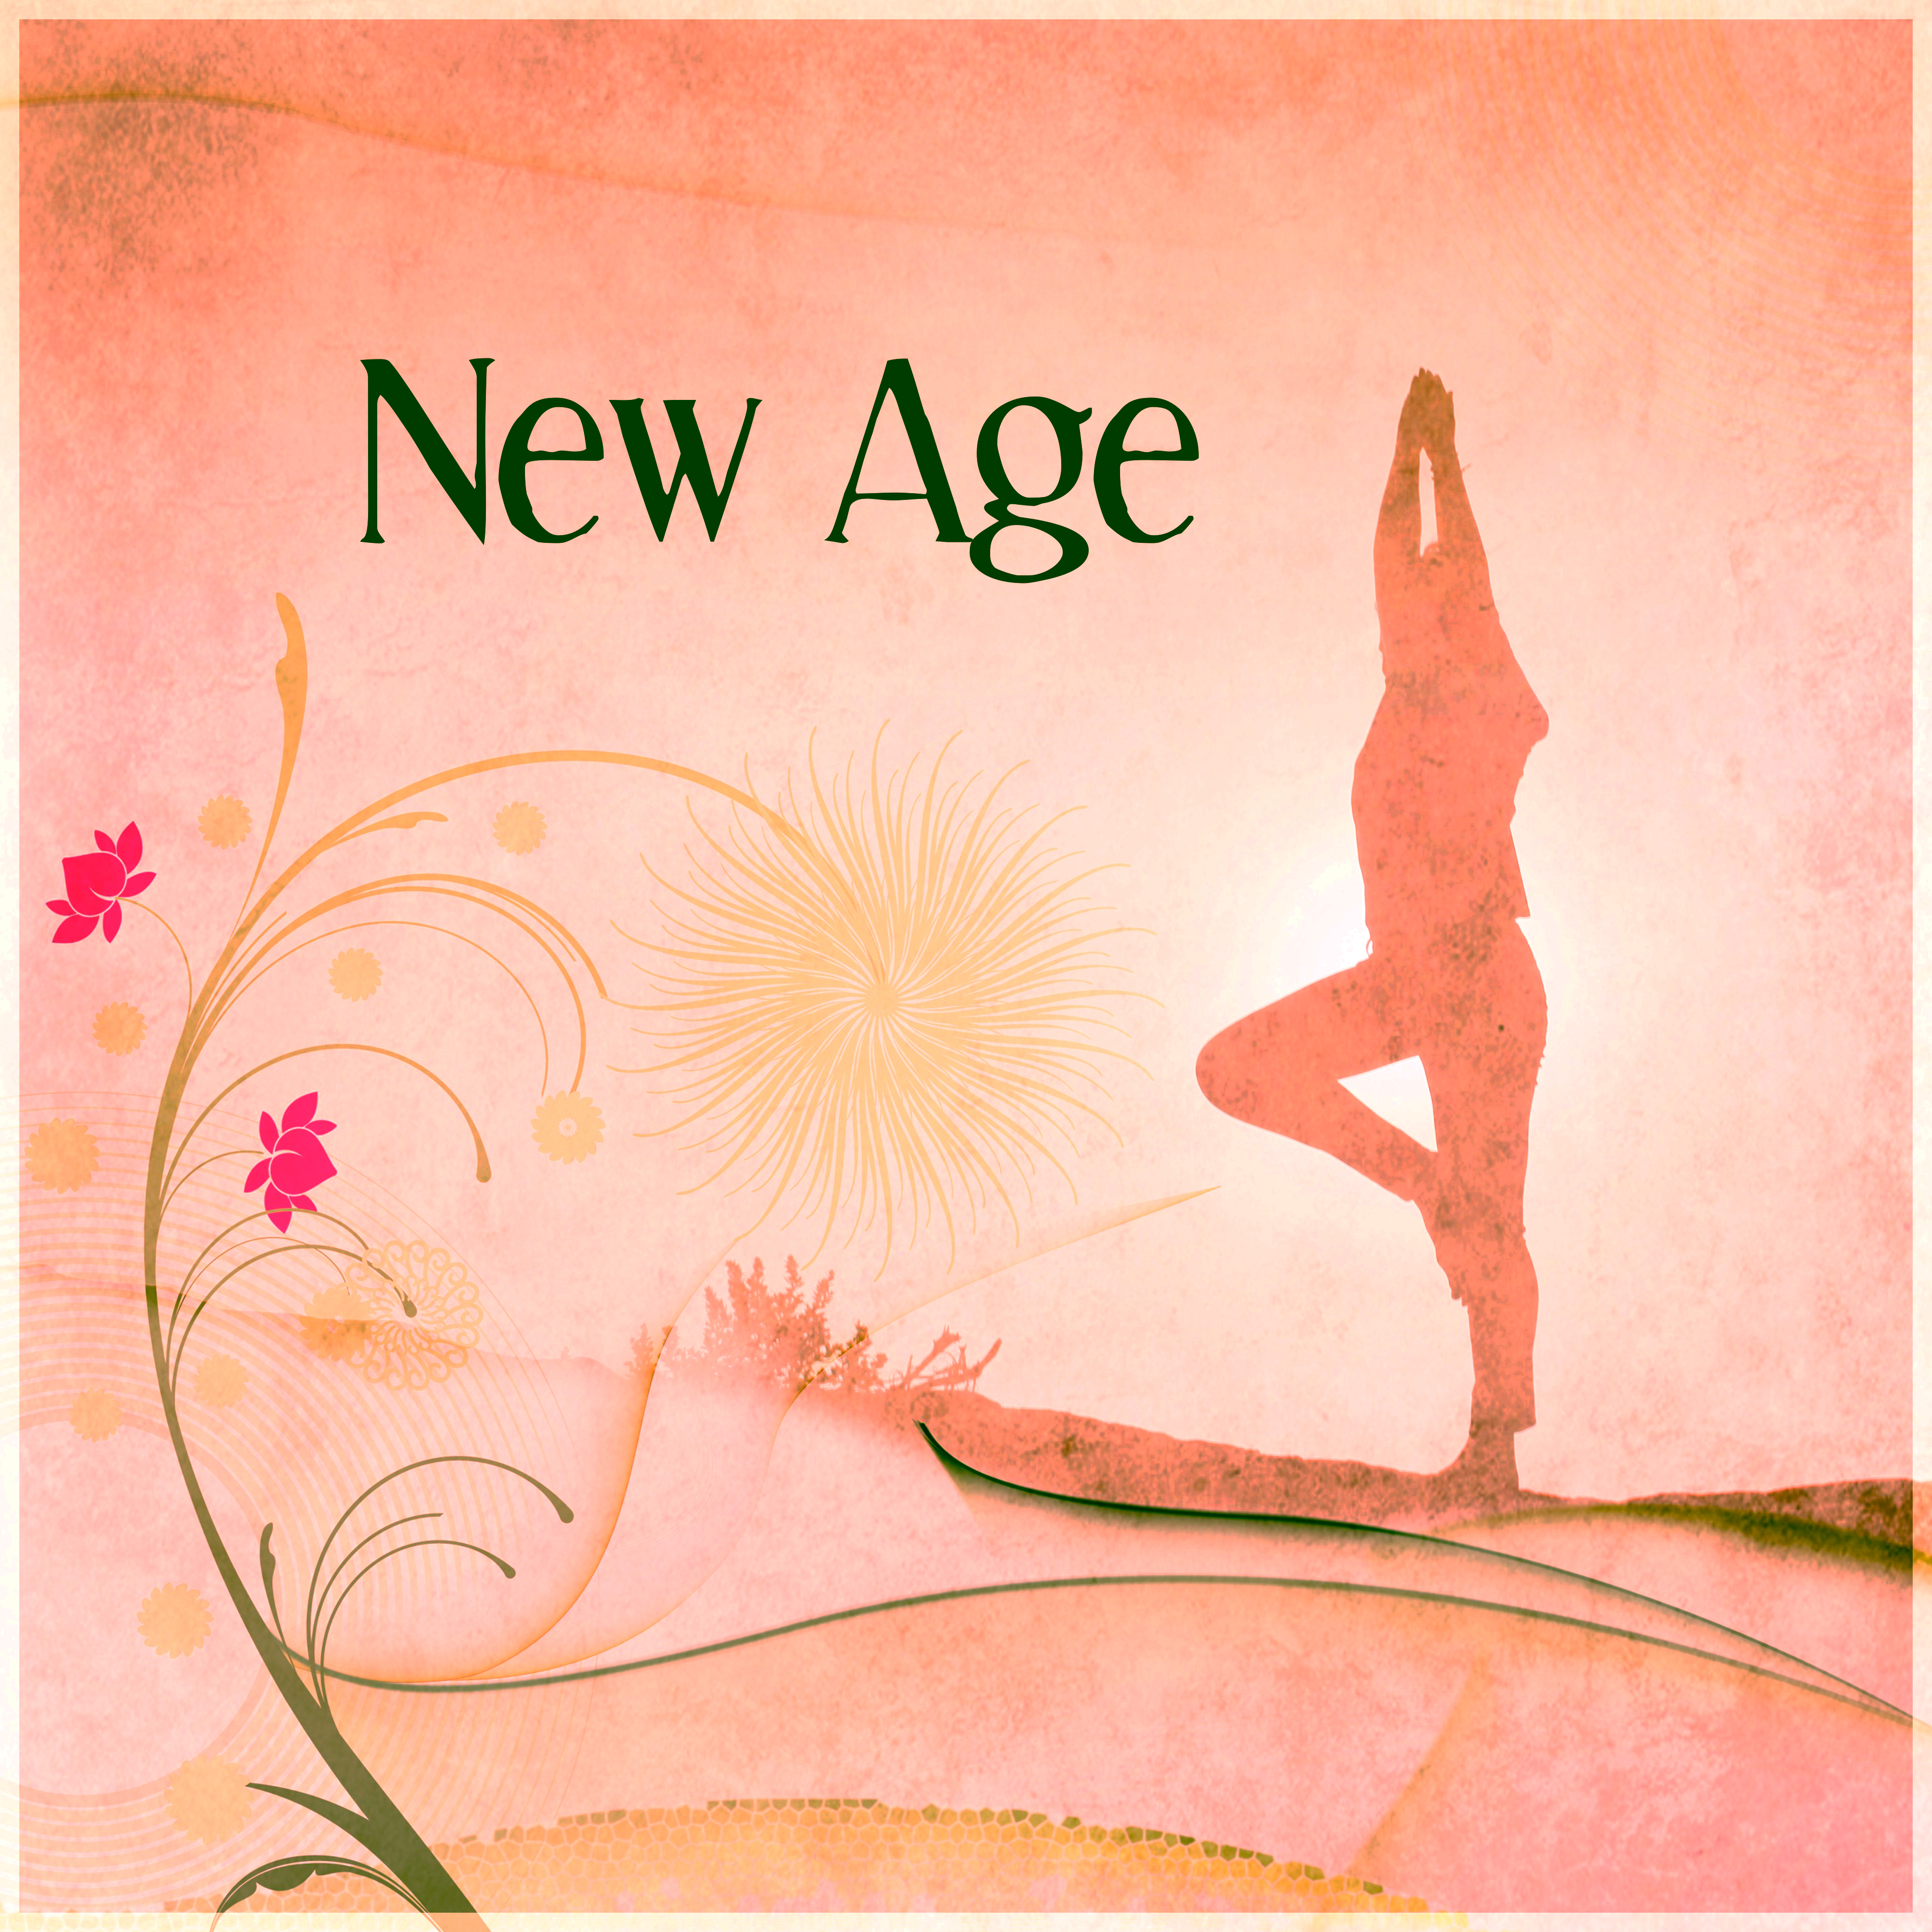 New Age – Deep Meditation, Pure Relaxation, Nature Sounds, Chakra, Yoga, Ambient Music, Rest, Contemplation